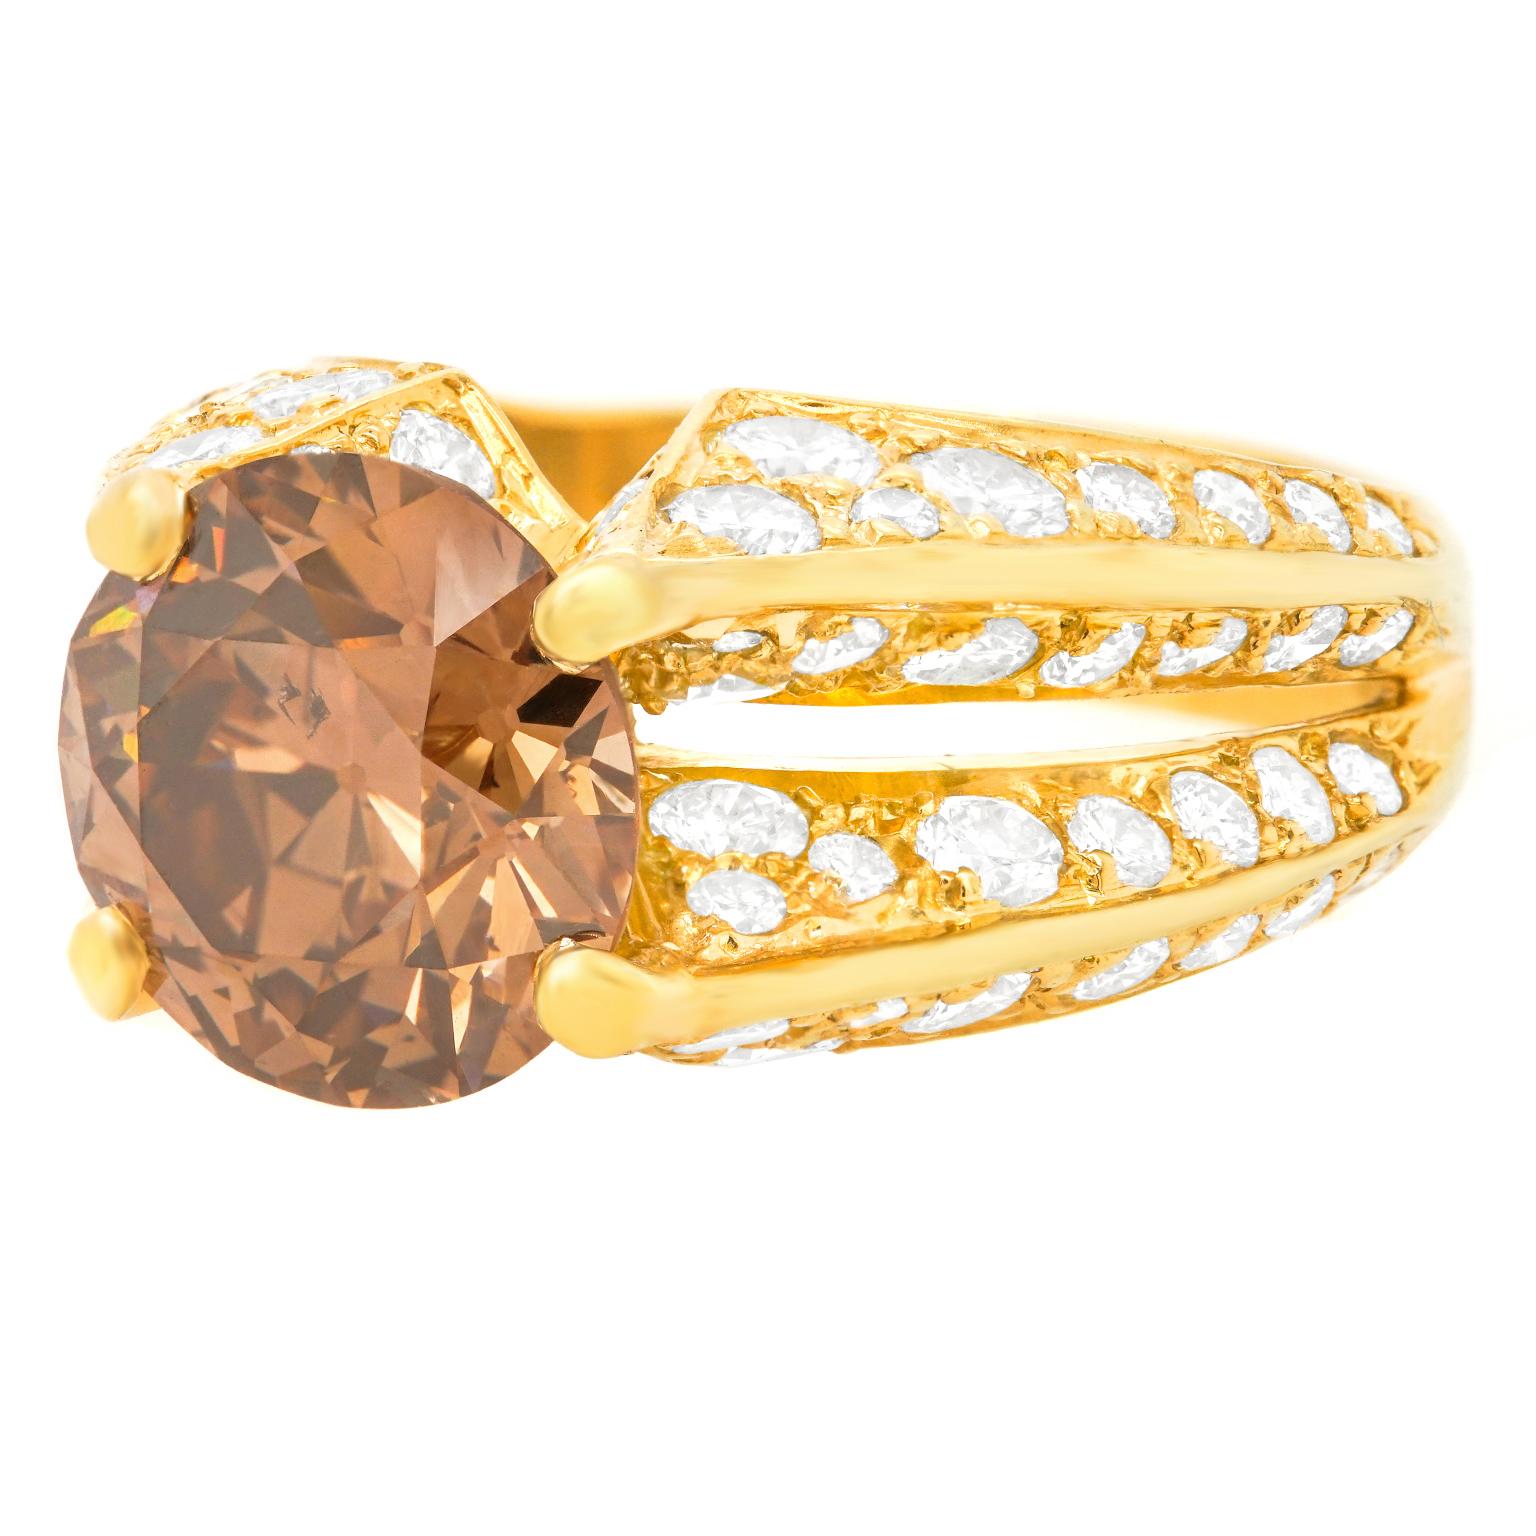 Spectacular Gold Ring by Jose Hess with 4.17 Carat Fancy Diamond GIA For Sale 2